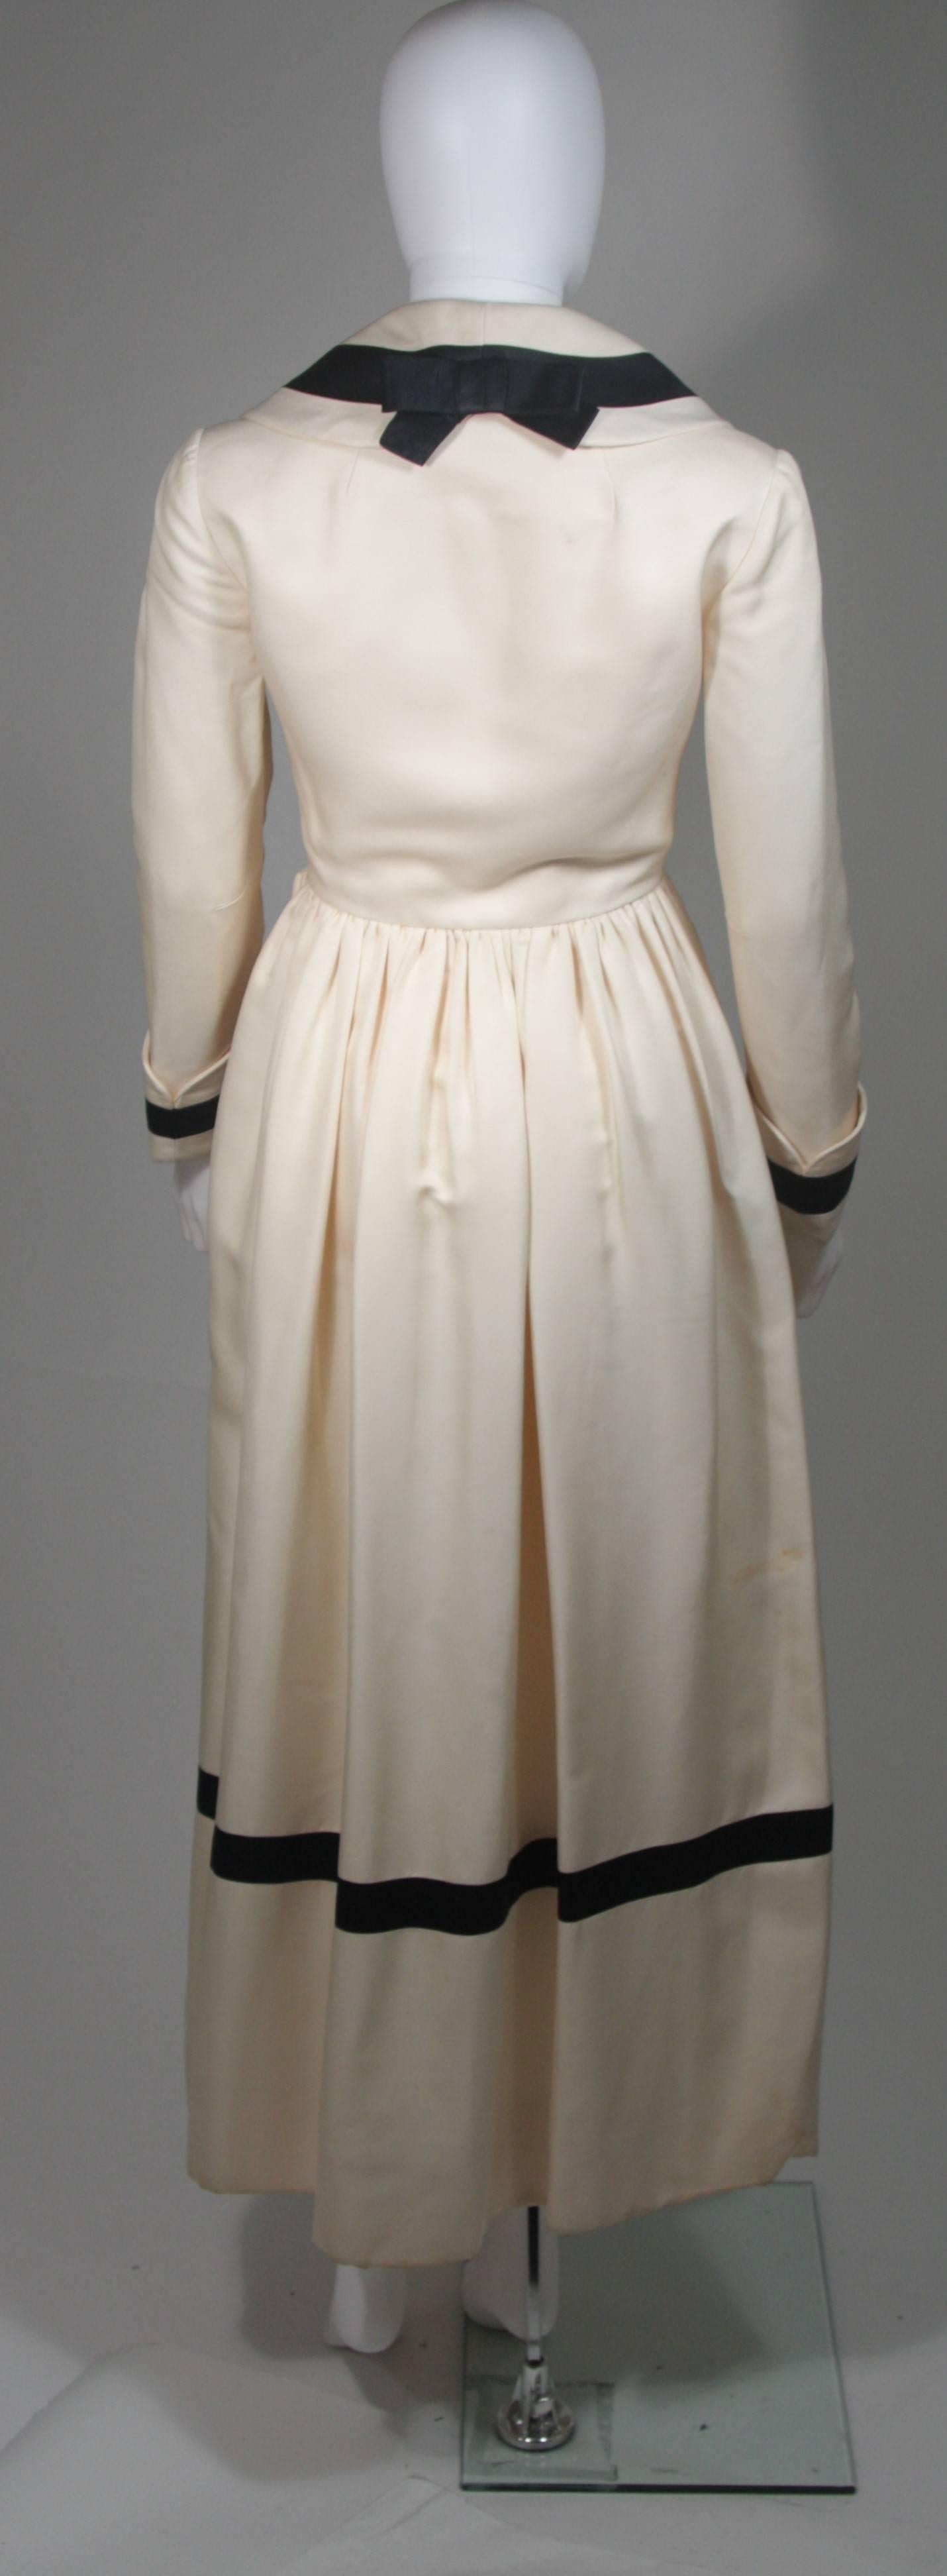 Geoffrey Beene Cream and Black Sailor Inspired Dress Size Small 3